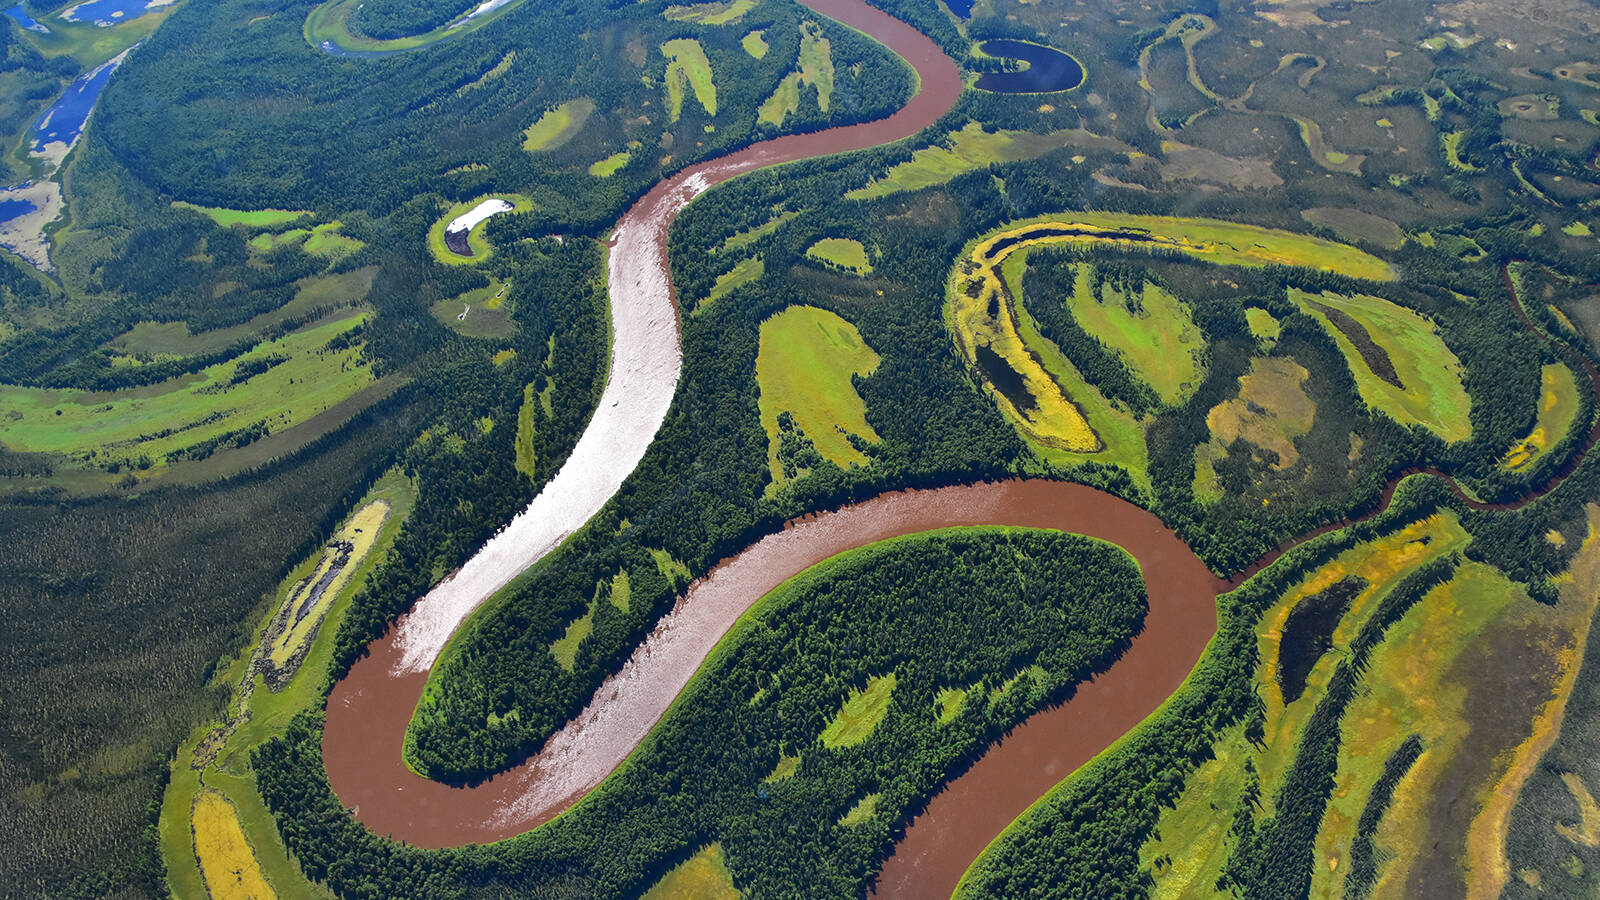 The Kuskokwim River is pictured. (Photo by Peter Griffith/NASA)